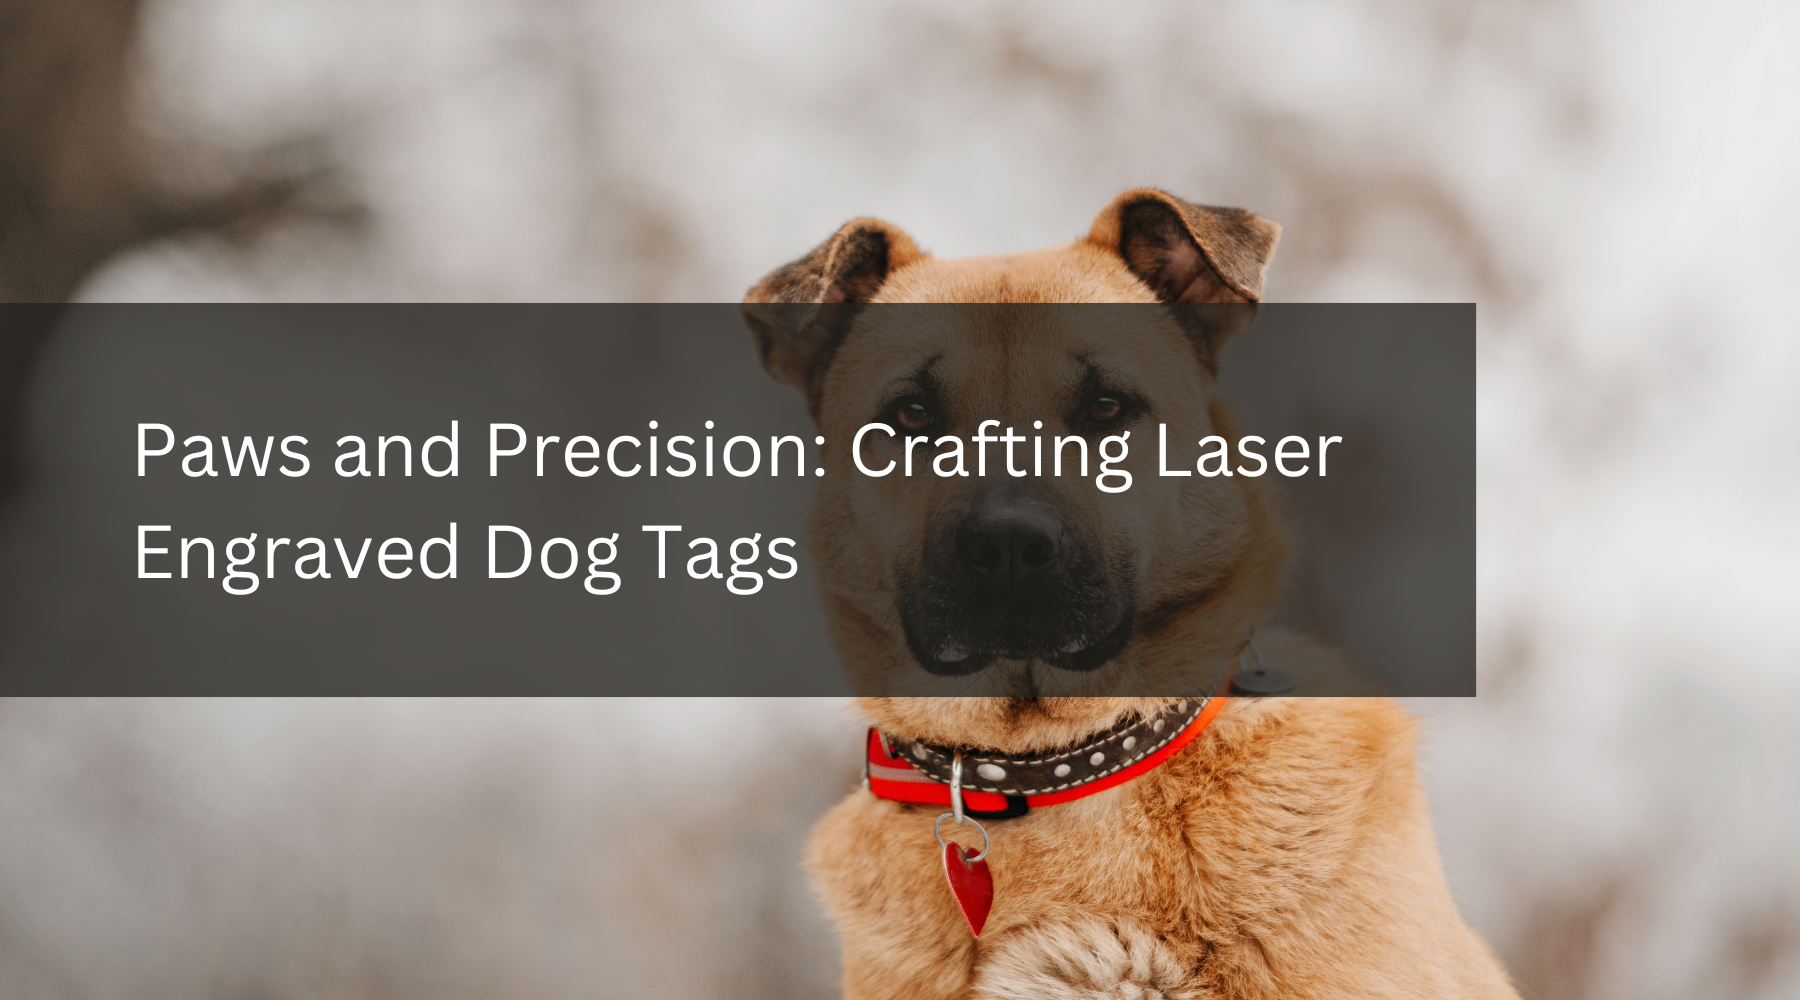 Paws and Precision: Crafting Laser Engraved Dog Tags